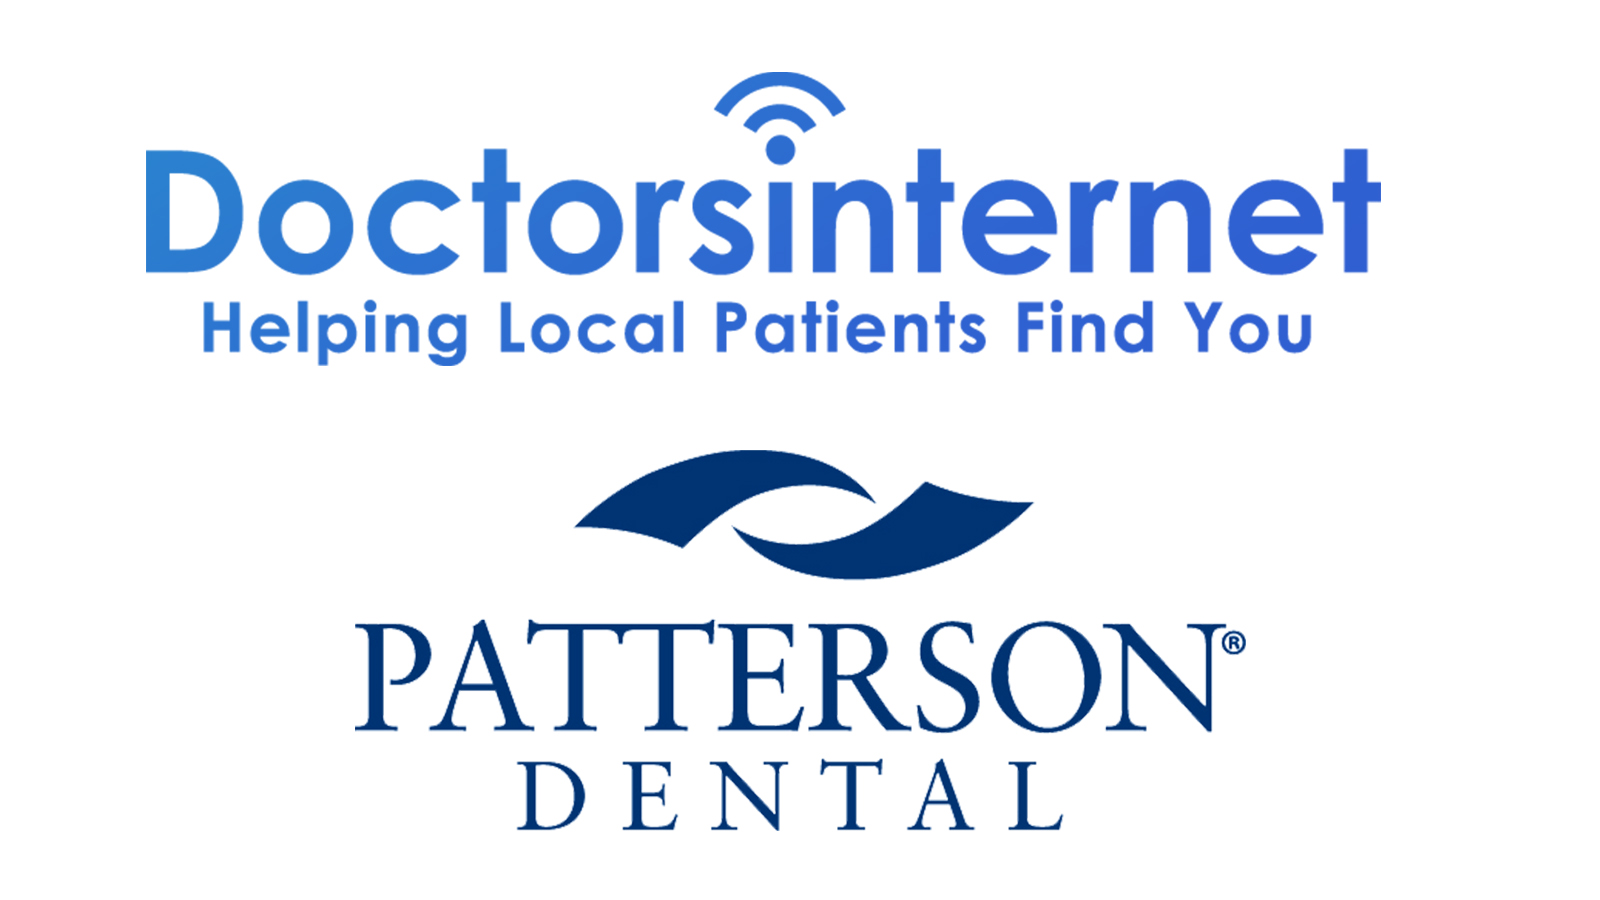 The image is a digital graphic that features two logos, one for  DoctorsInternet  and the other for  Patterson Dental,  with a background that transitions from white to gray.